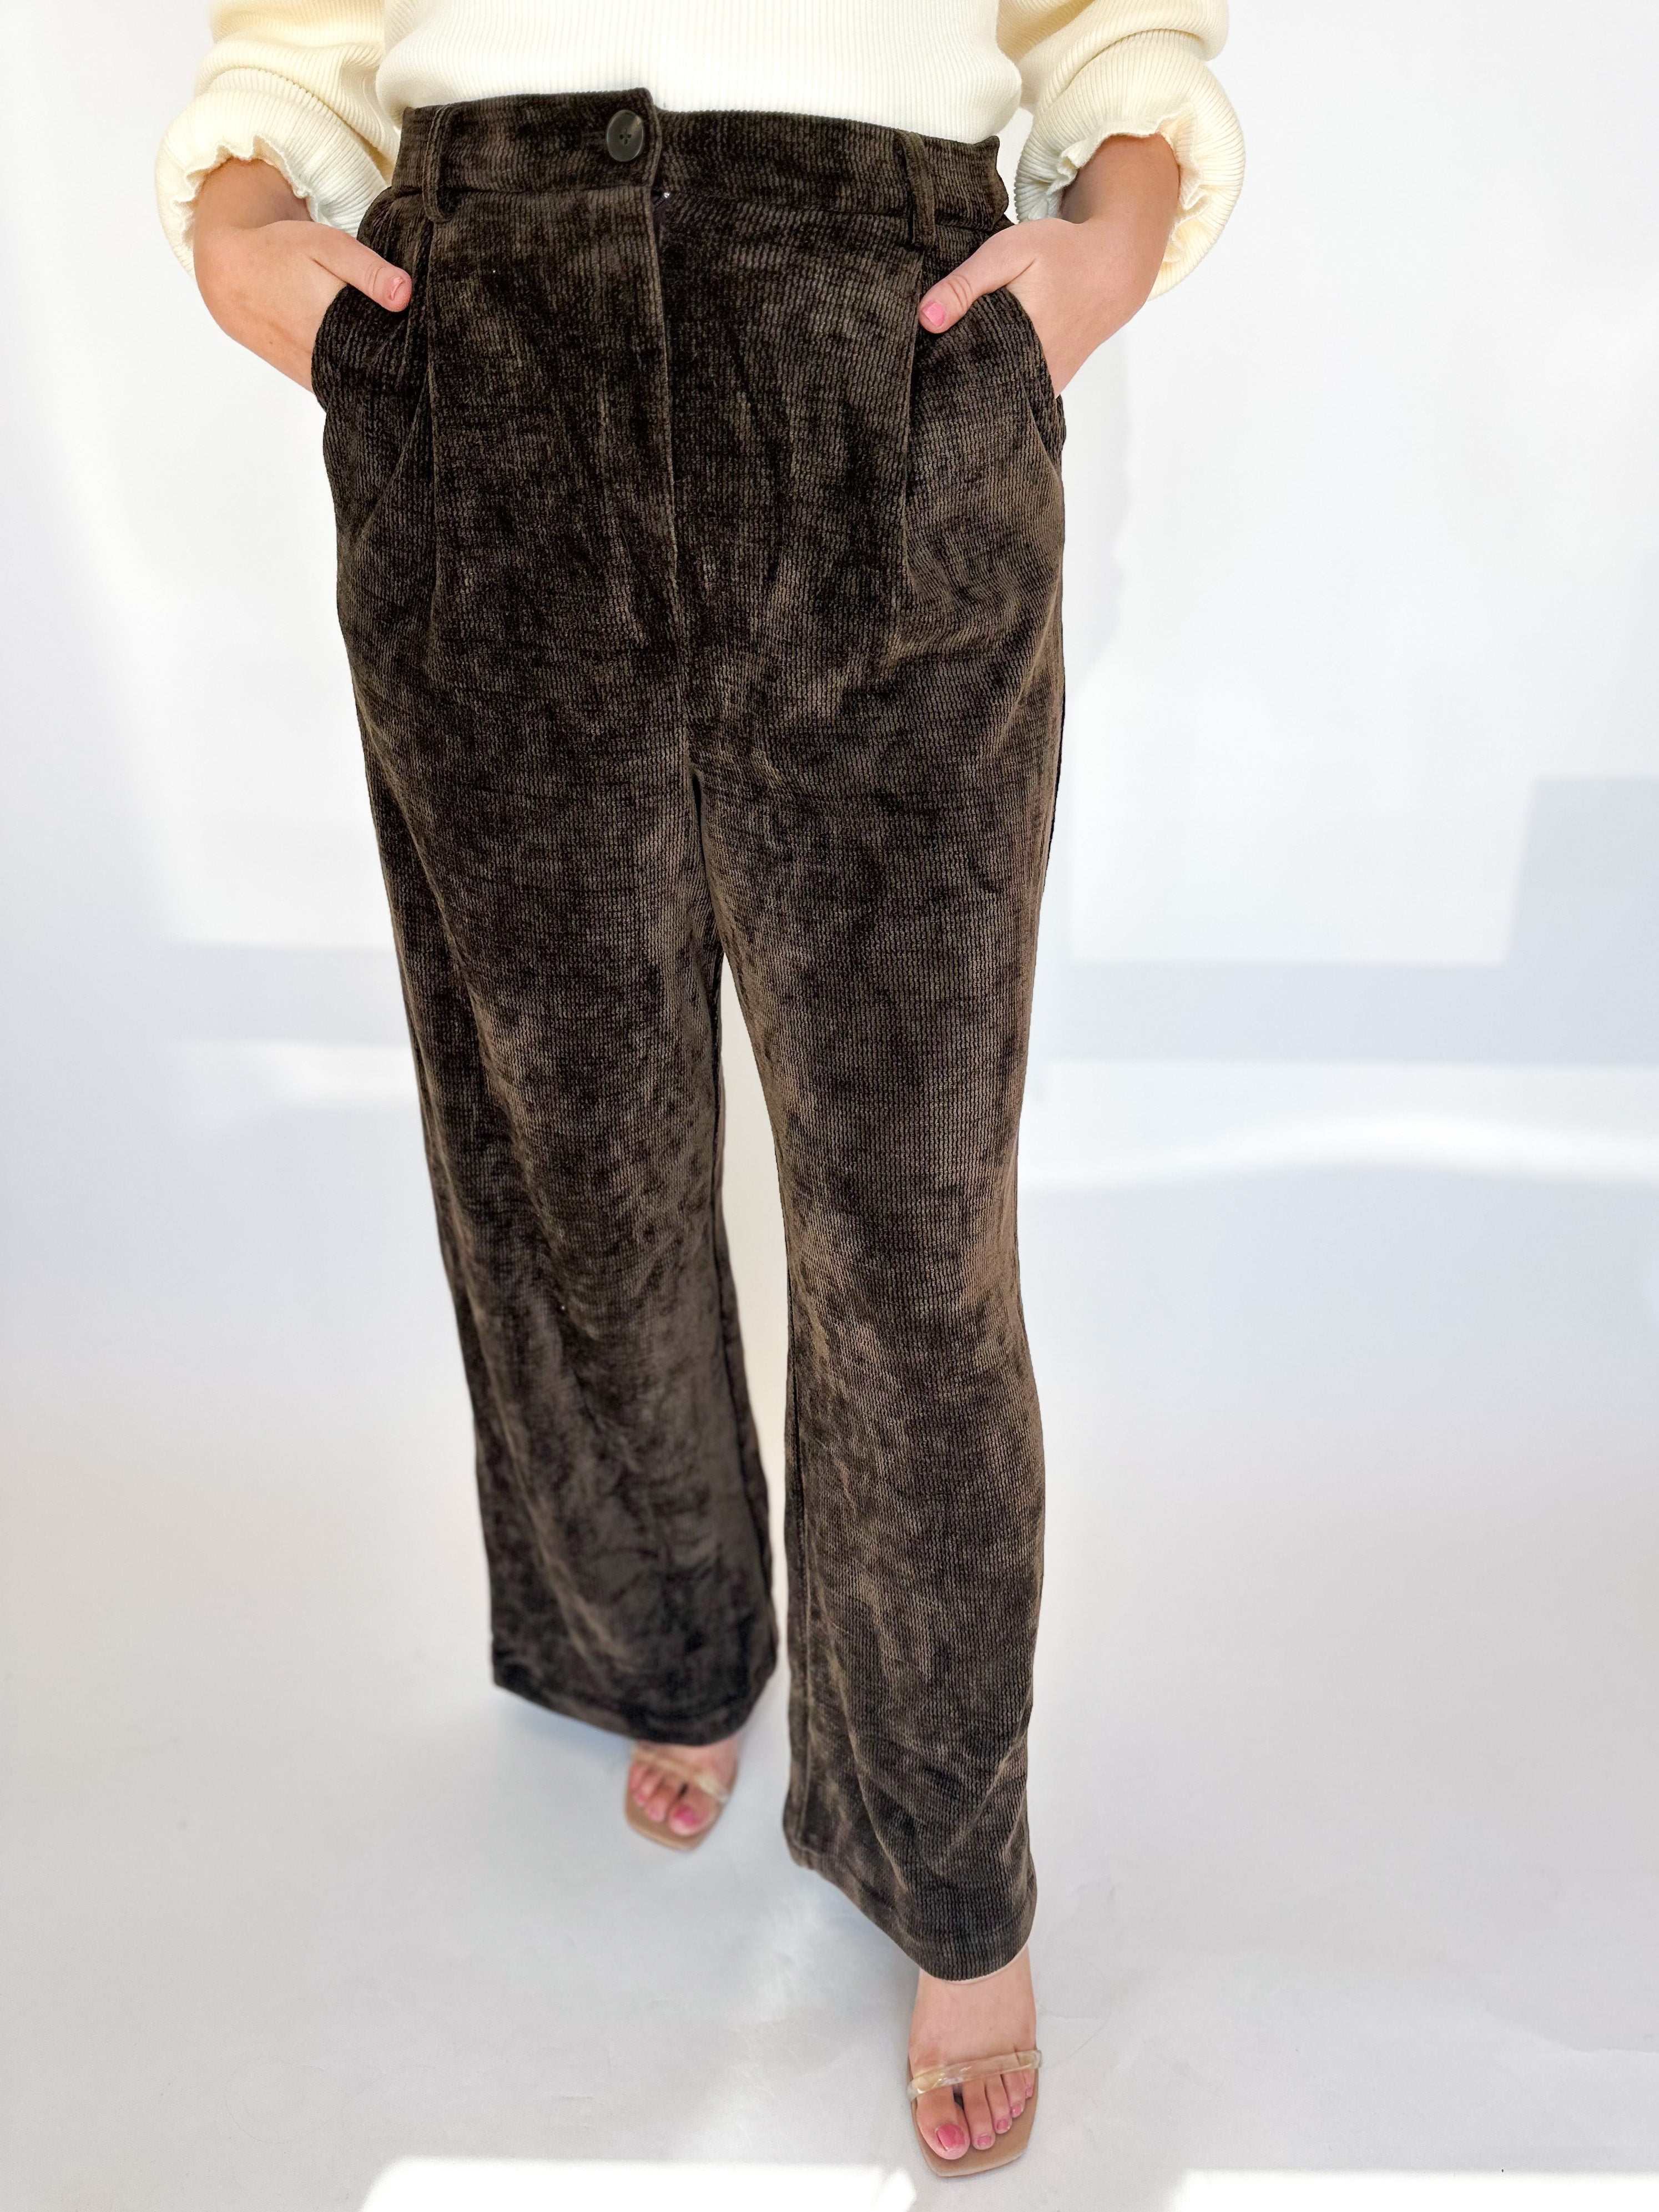 The Fall It Girl Trouser Pants-400 Pants-CURRENT AIR CLOTHING-July & June Women's Fashion Boutique Located in San Antonio, Texas